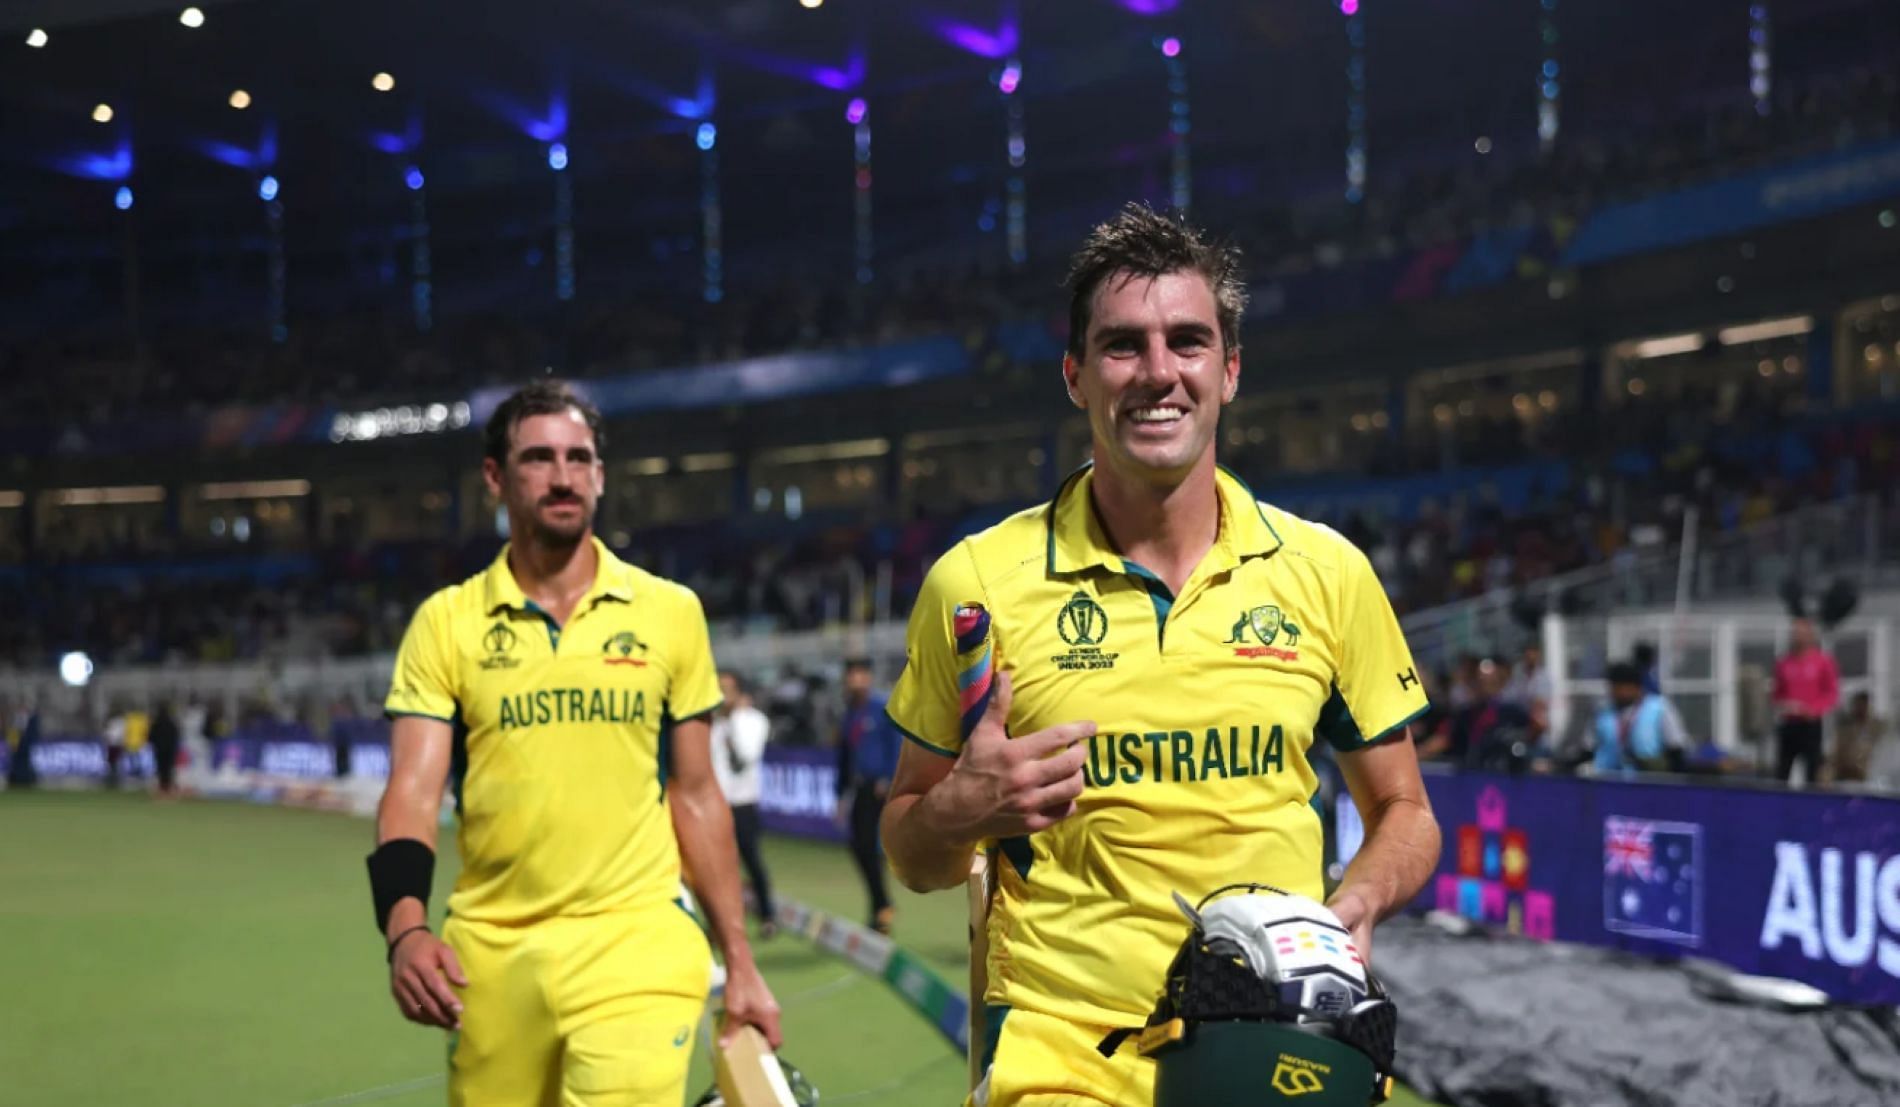 Australia pulled off a thrilling win against South Africa in the semi-final